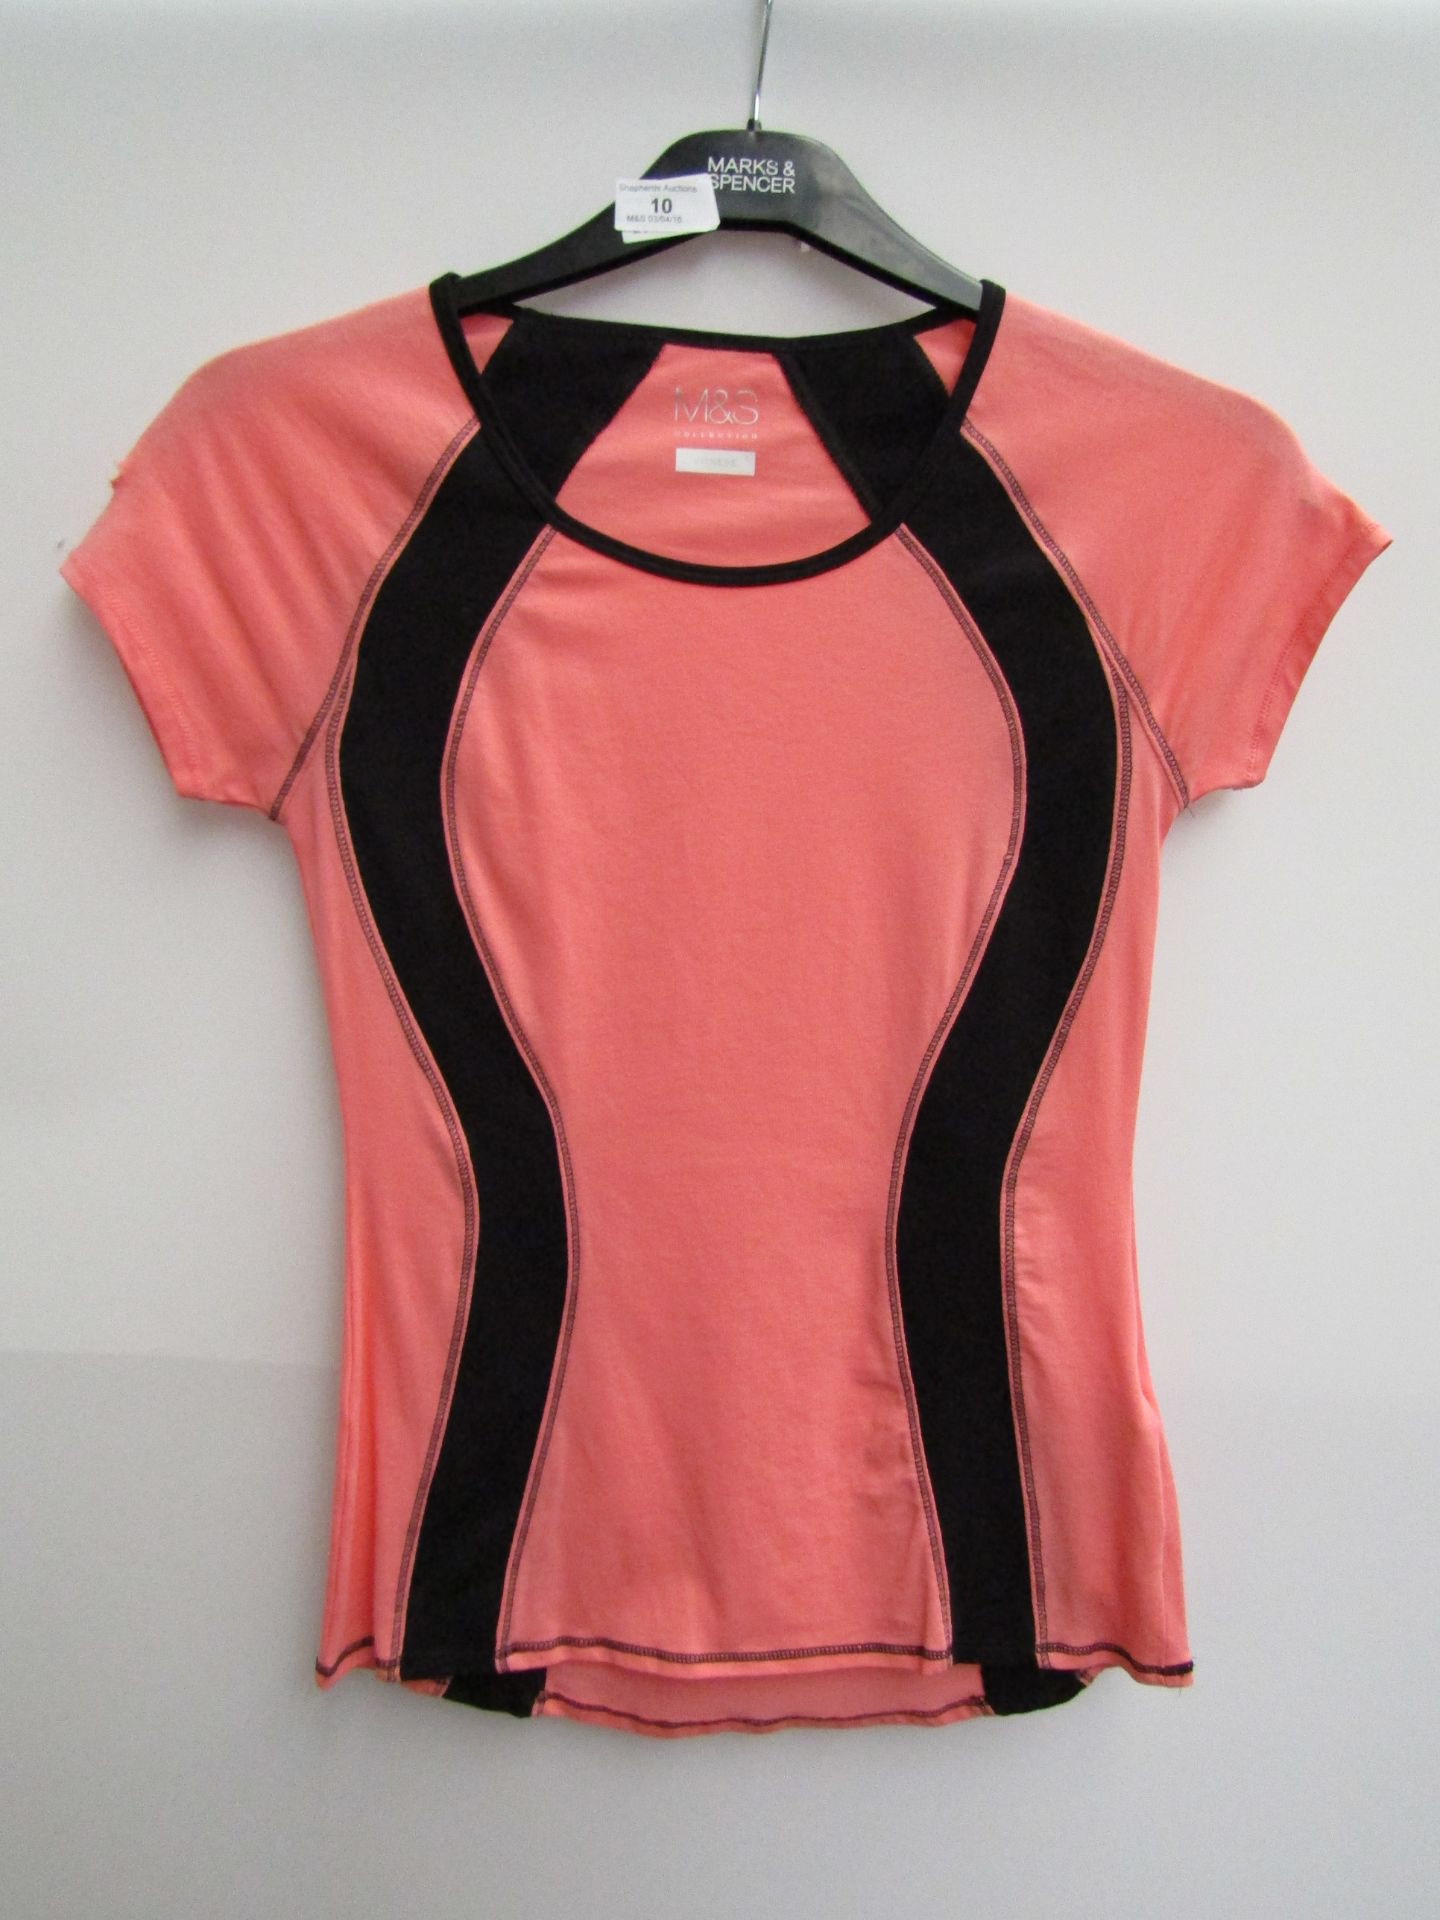 M&S Collection Fitness Ladies Short Sleeve Sports Top Size 8. Please read lot zero prior to